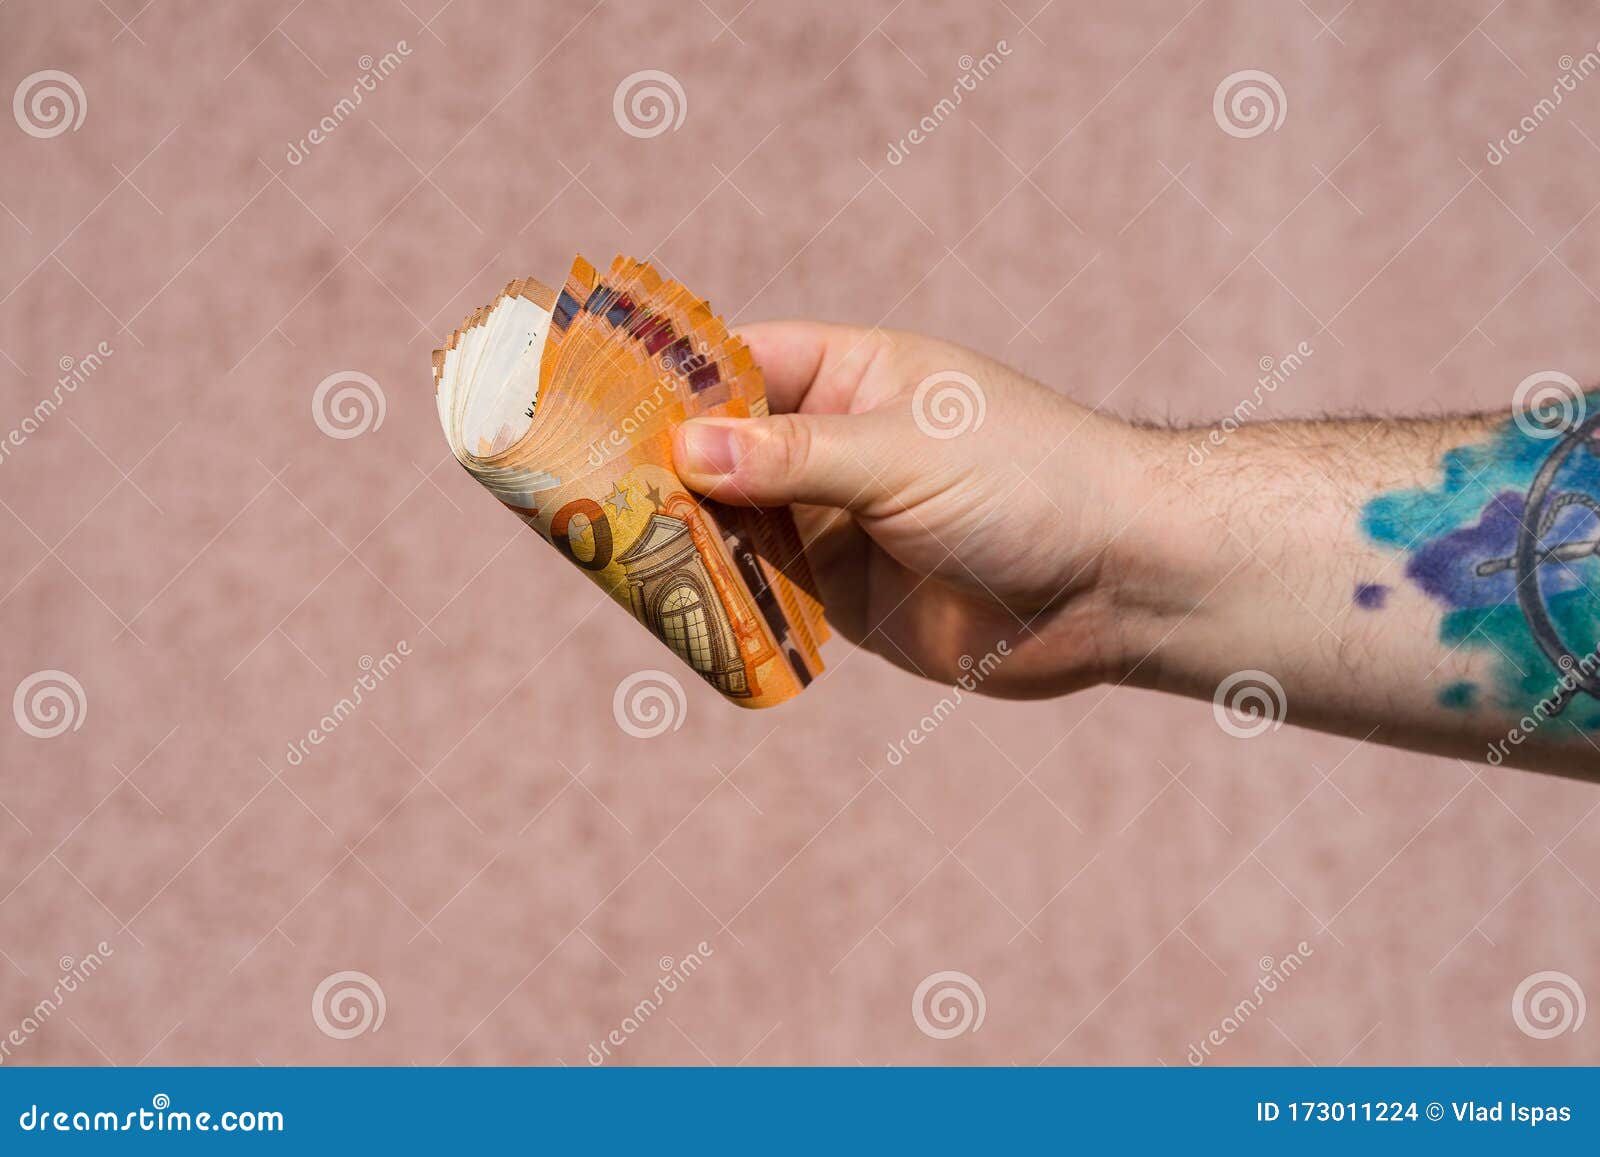 Hand with Tattoo Holding Showing Euro Money and Giving or Receiving Money  Like Tips, Salary. 50 EURO Banknotes EUR Currency Editorial Stock Image -  Image of closeup, concept: 173011224